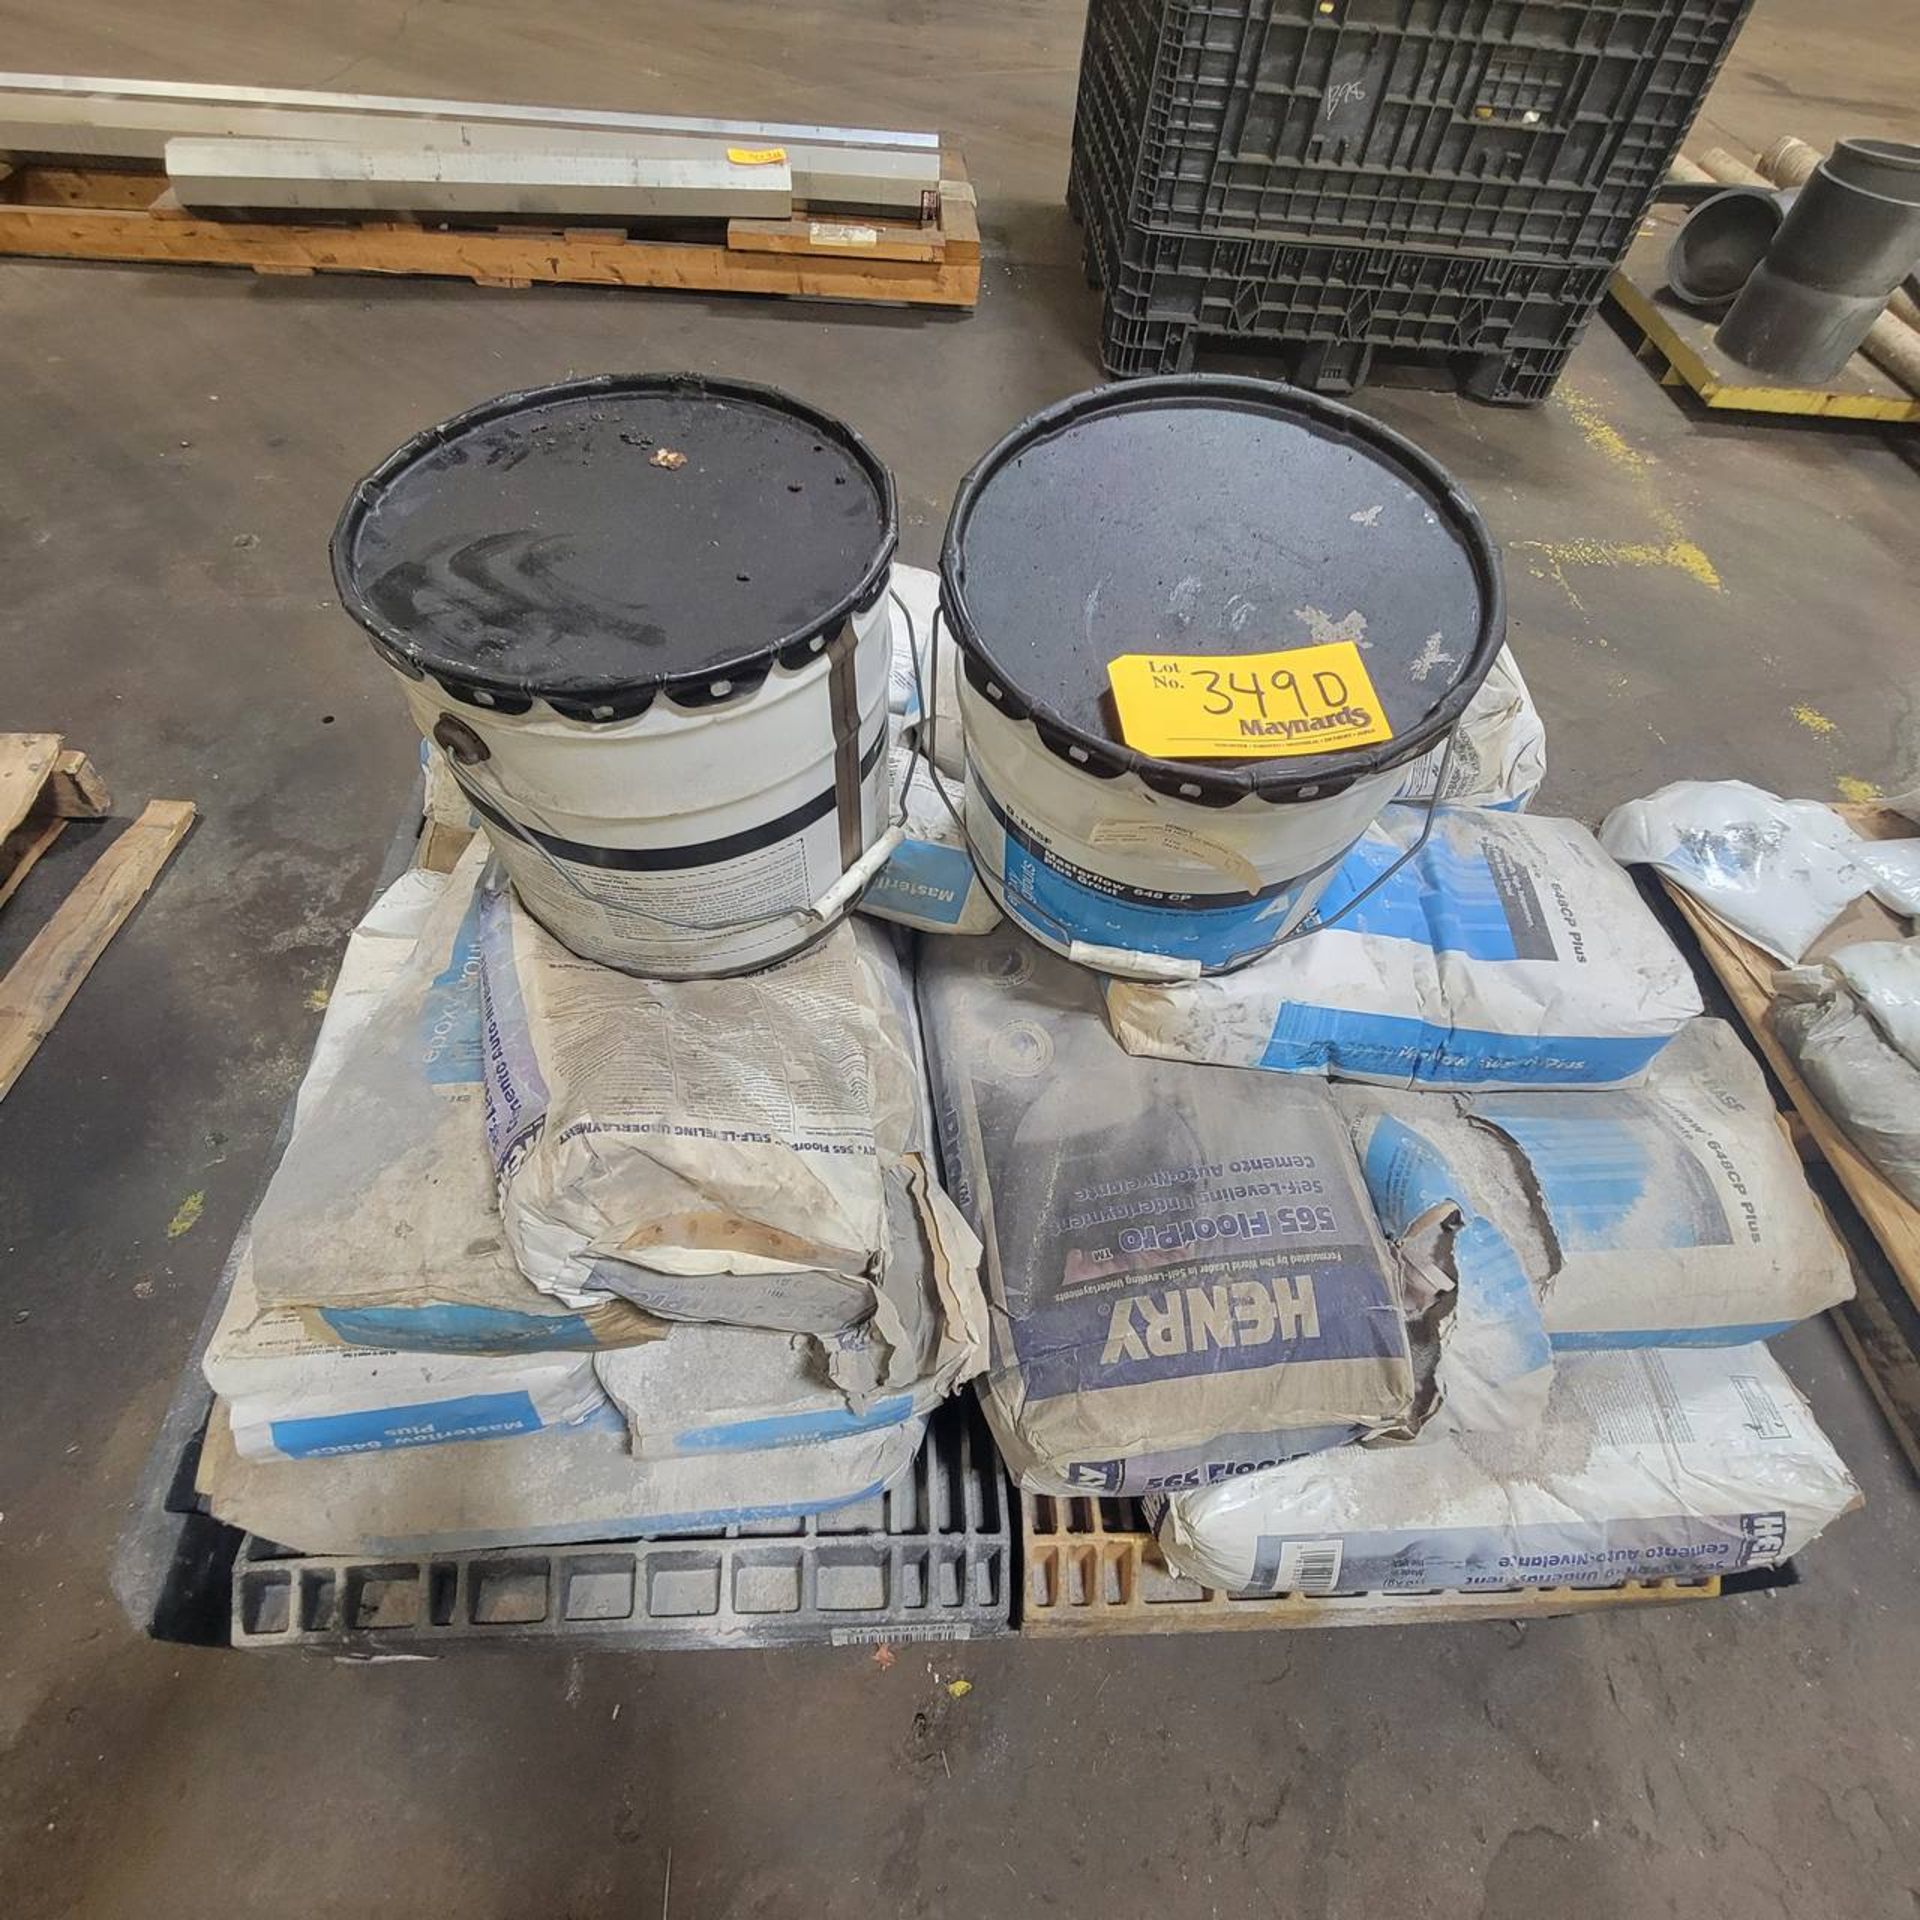 Pallet of self-leveling concrete mix